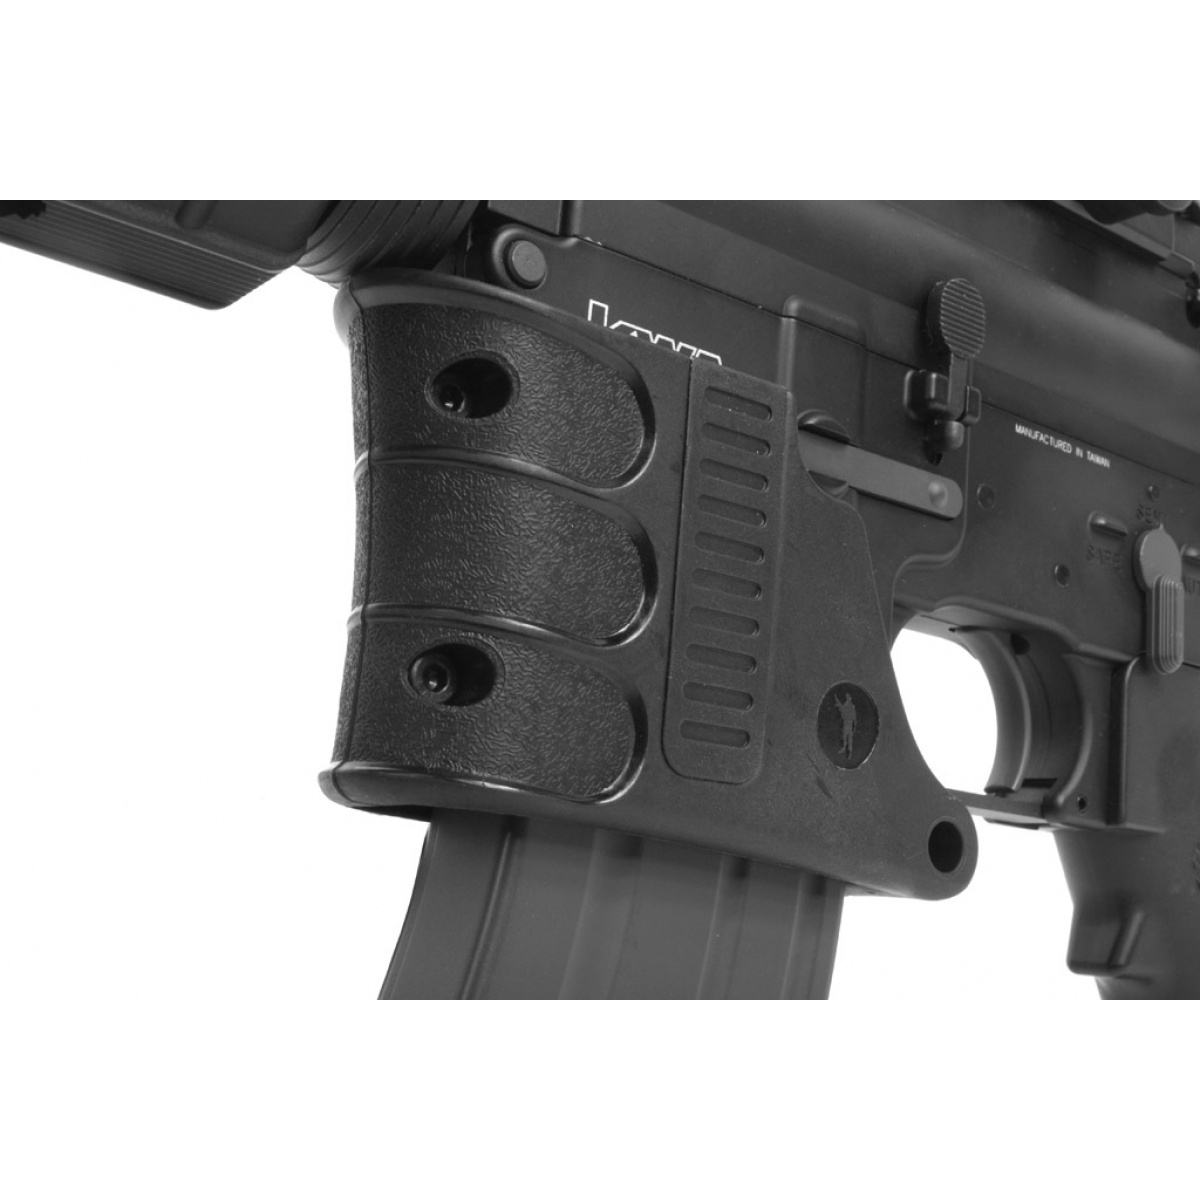 Tactical Rifle Magazine Well Grip Black For Airsoft 